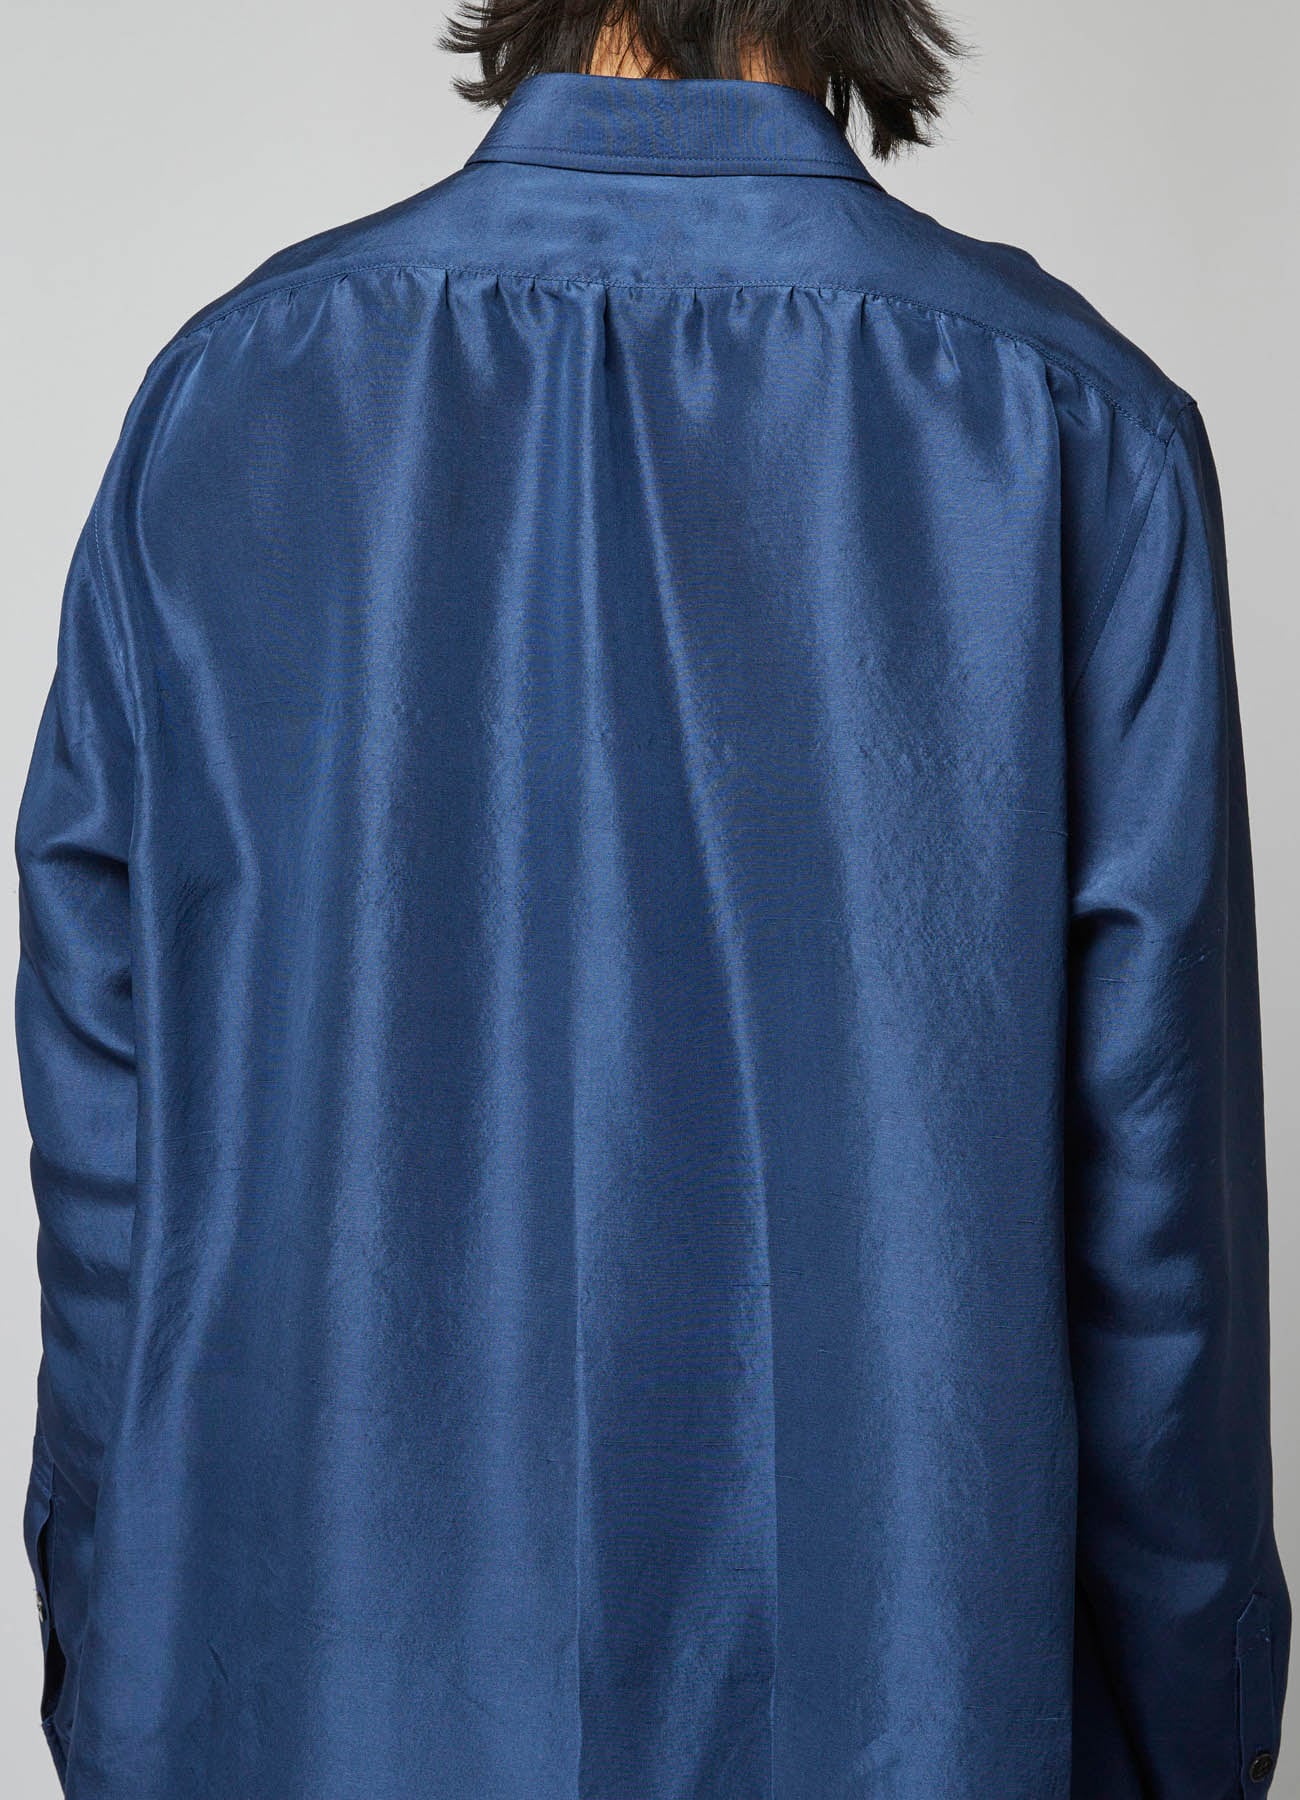 INDIA INDIGO DYEING SHANTUNG STRING BLOUSE WITH SPARE COLLAR BLOUSE